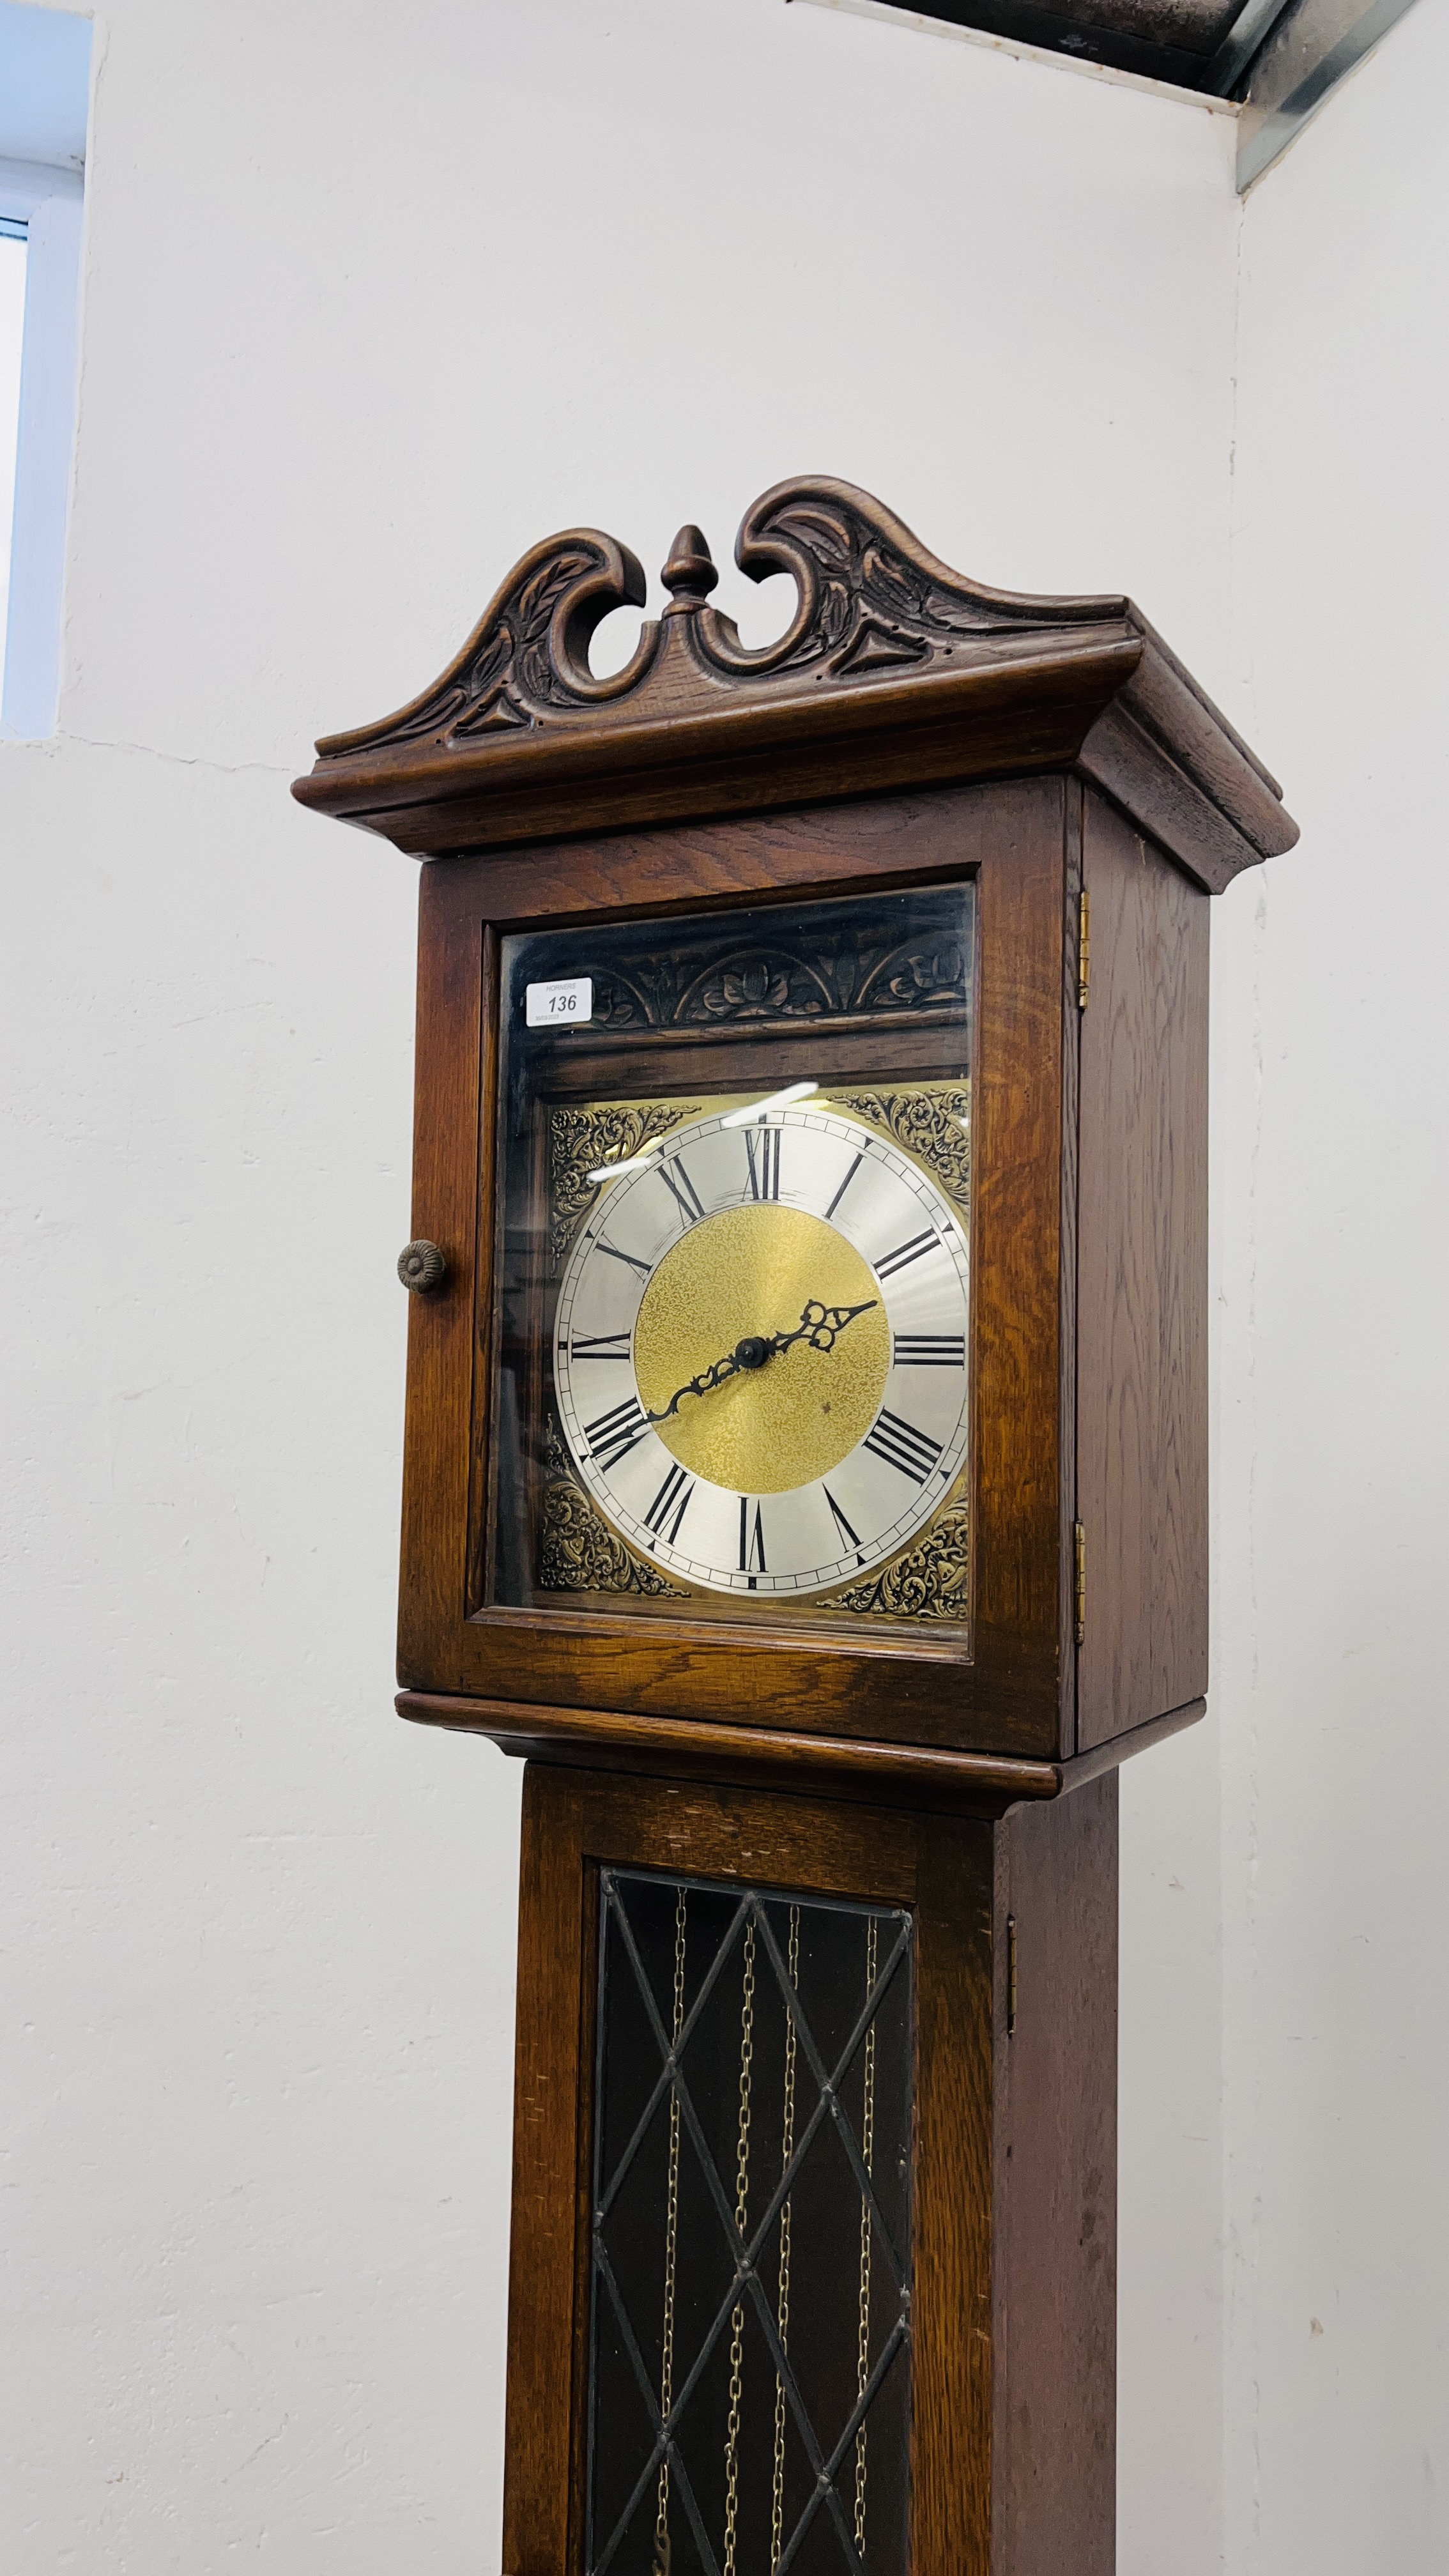 A REPRODUCTION OAK LONG CASE CLOCK WITH LINEN FOLD DETAIL. - Image 3 of 7